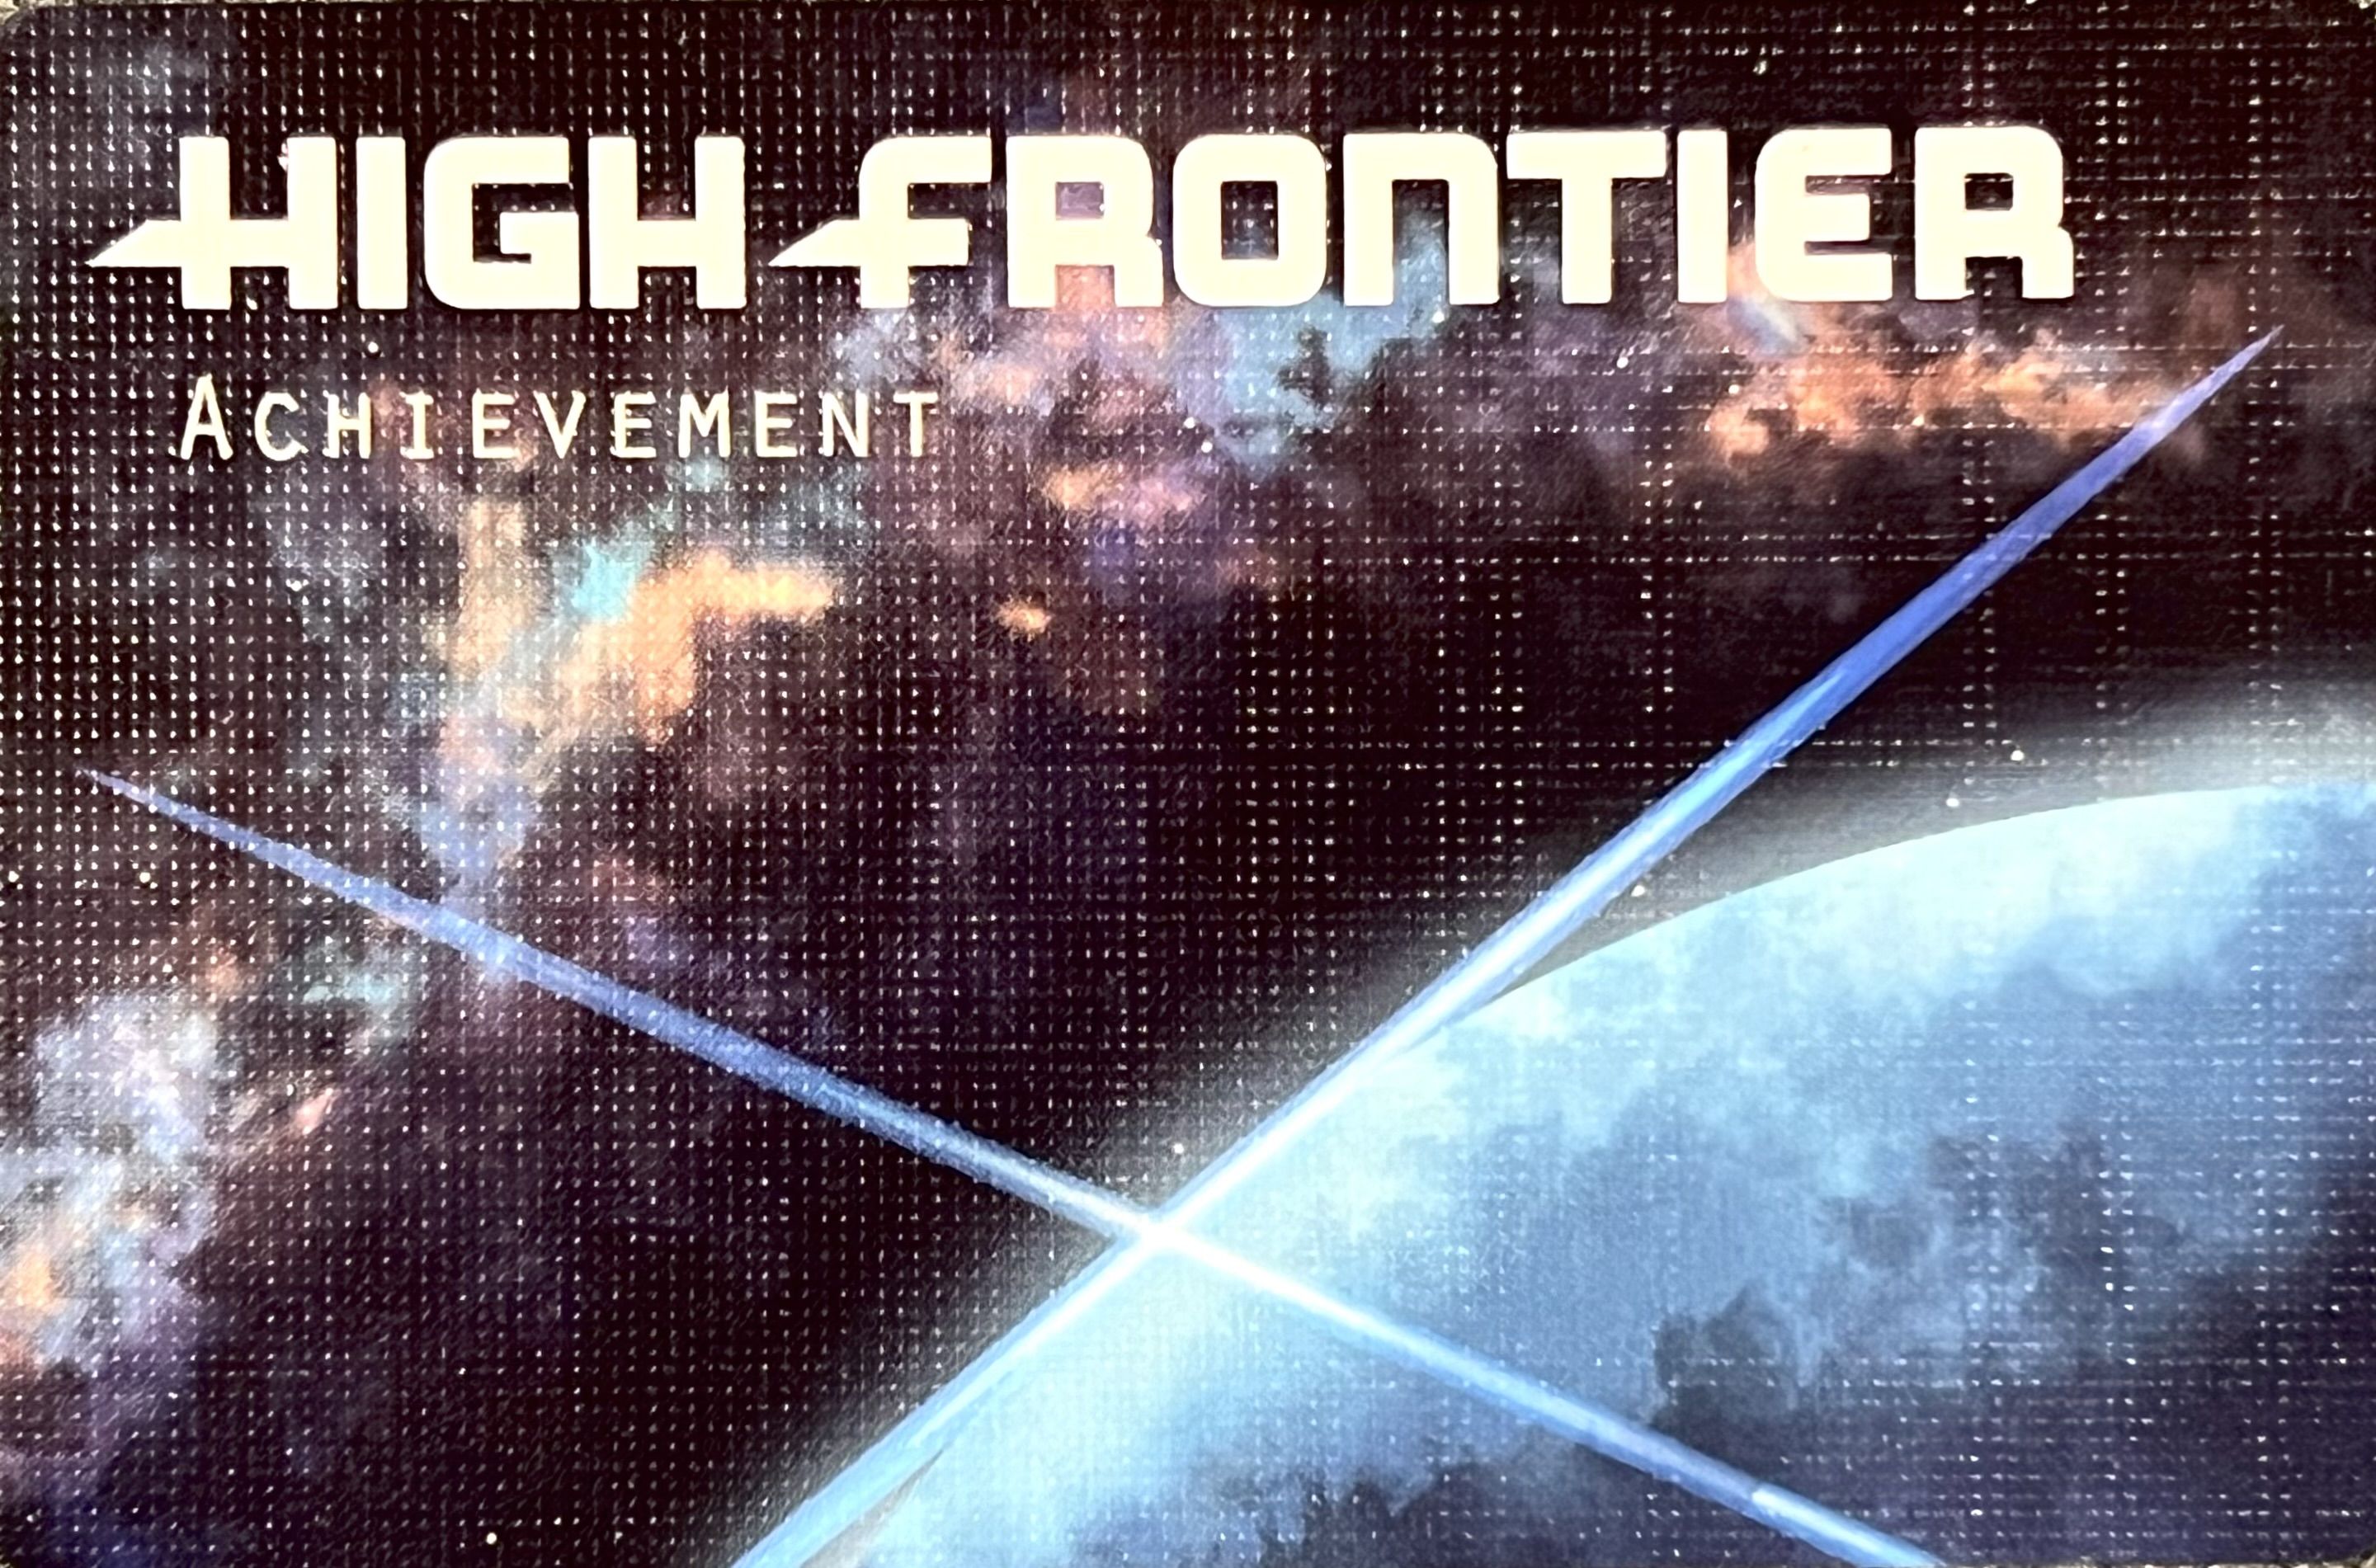 High Frontier 4 All: Promo Pack 2 – Achievements